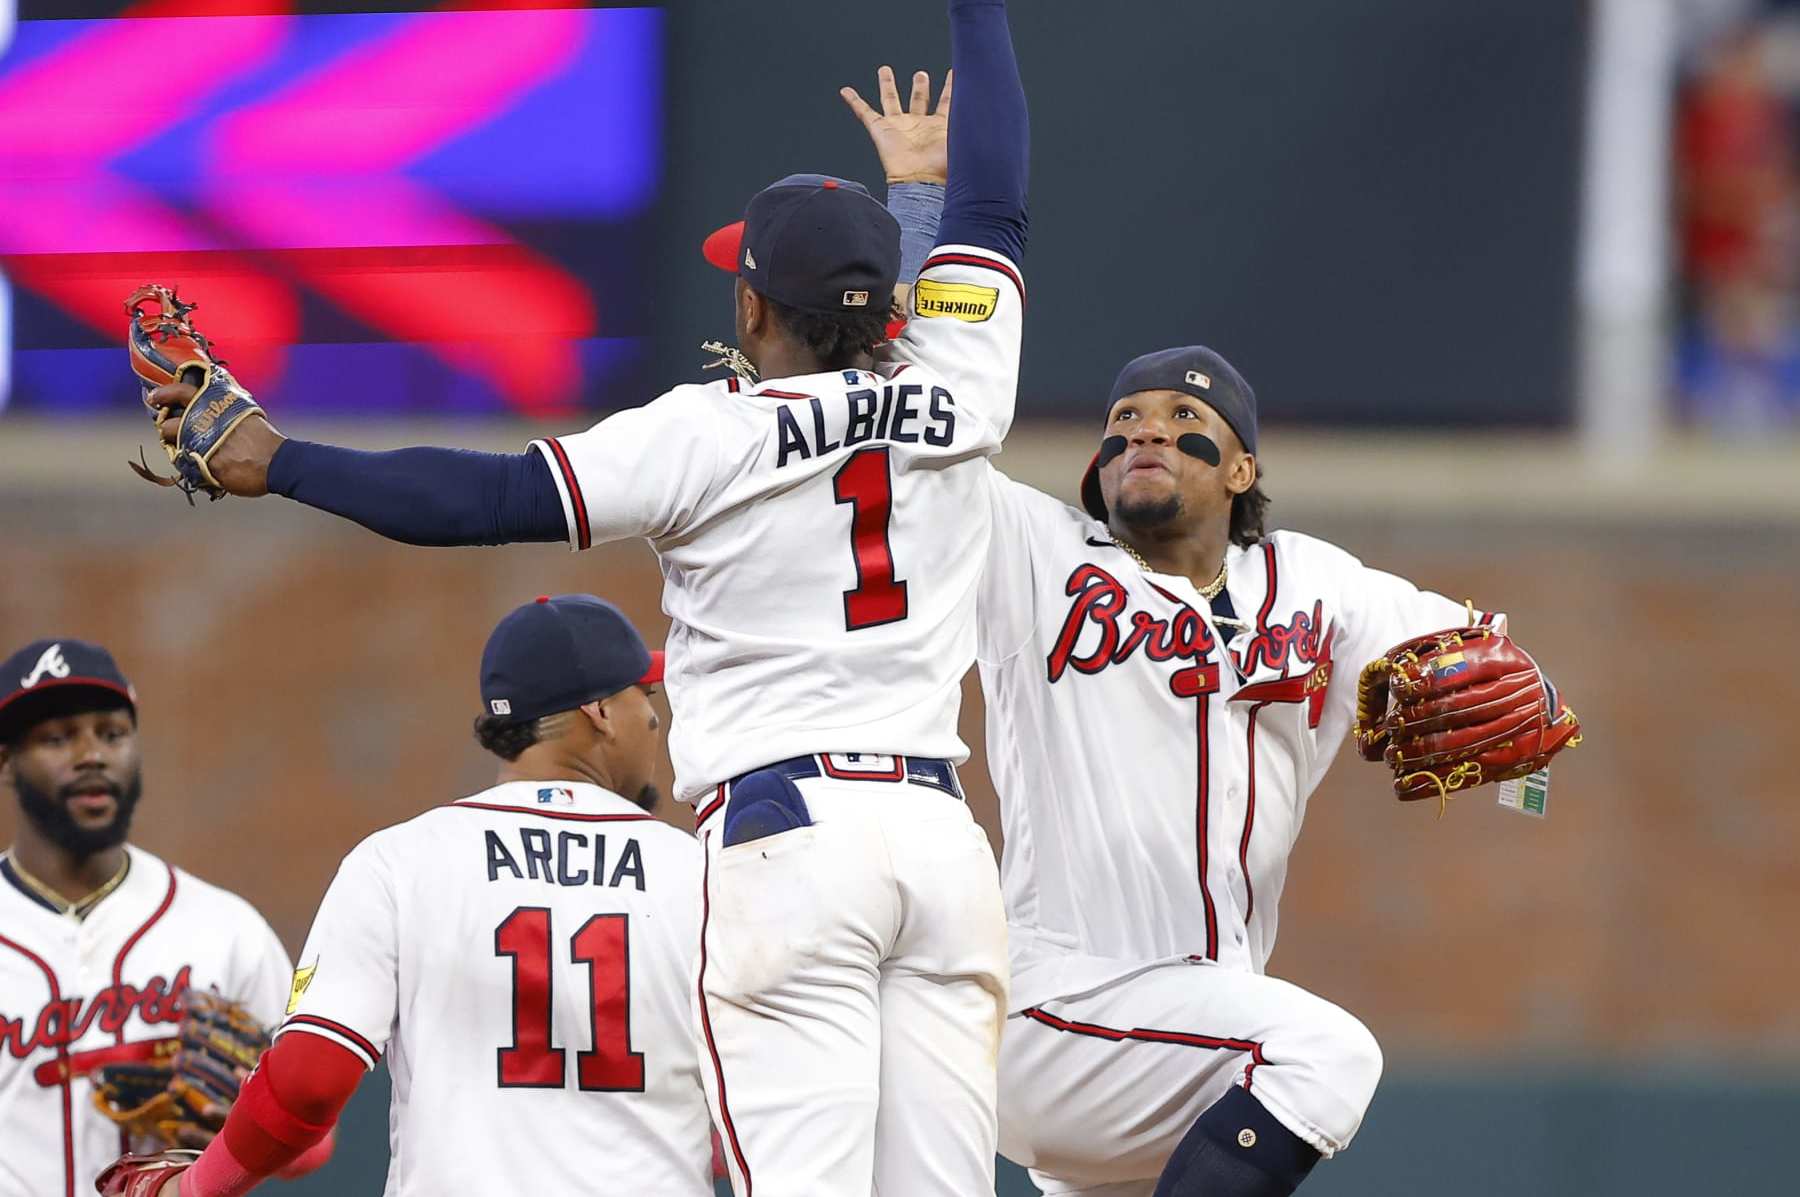 What to expect from the Braves in the second half?